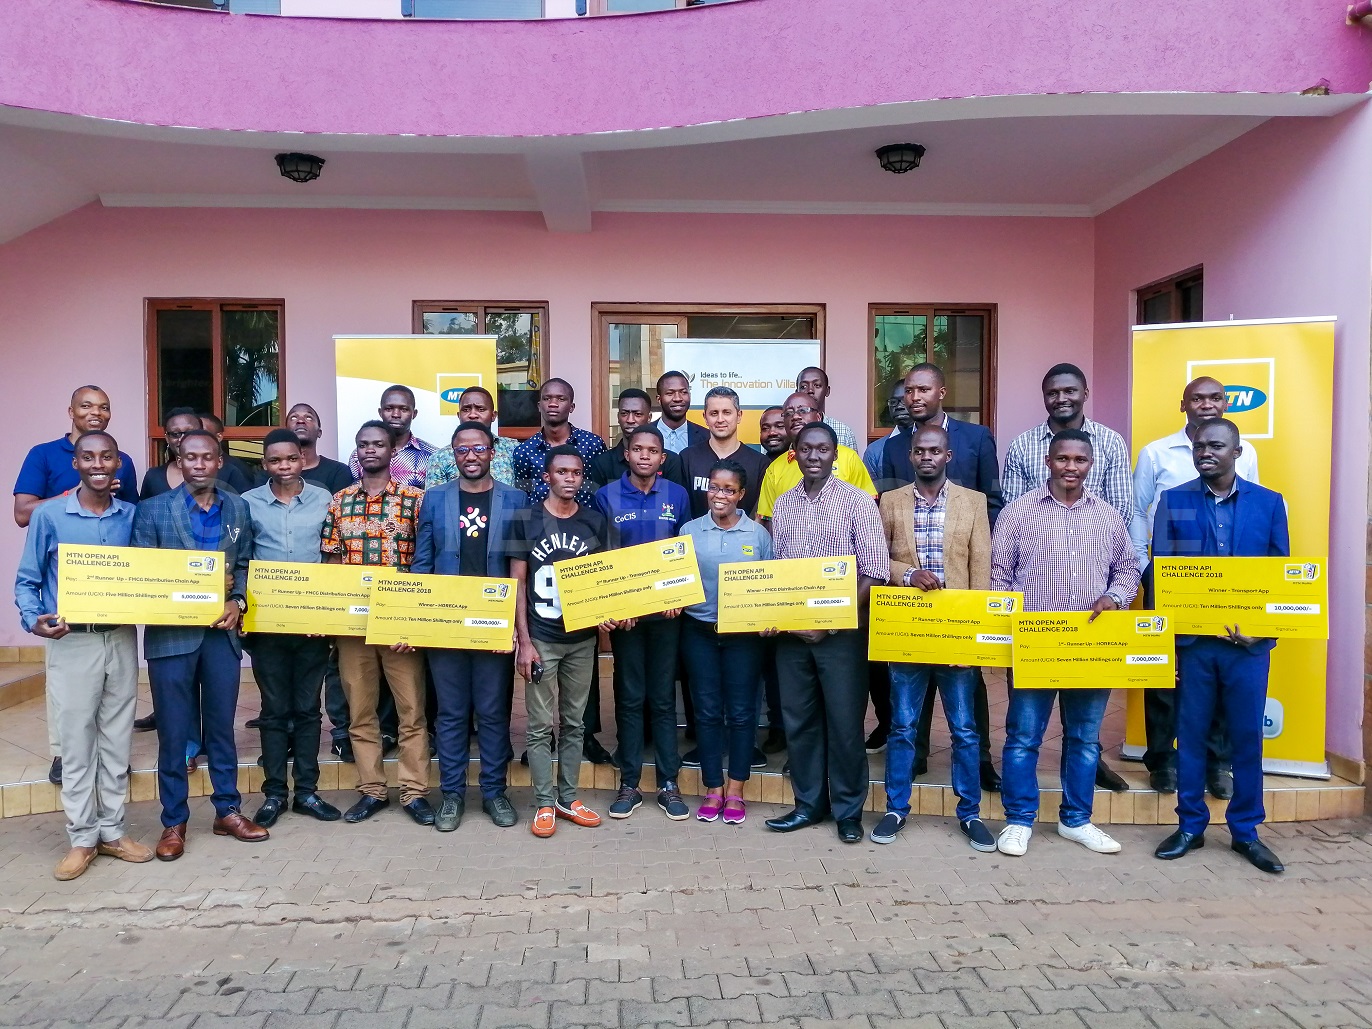 Winners of the 2018 MTN API App Challenge pose for a group photo after receiving their cash prize at the MTN Uganda offices in Nyonyi Gardens, Kampala on Friday March, 29th 2019 | Photo By PC TECH MAGAZINE/Olupot Nathan Ernest.